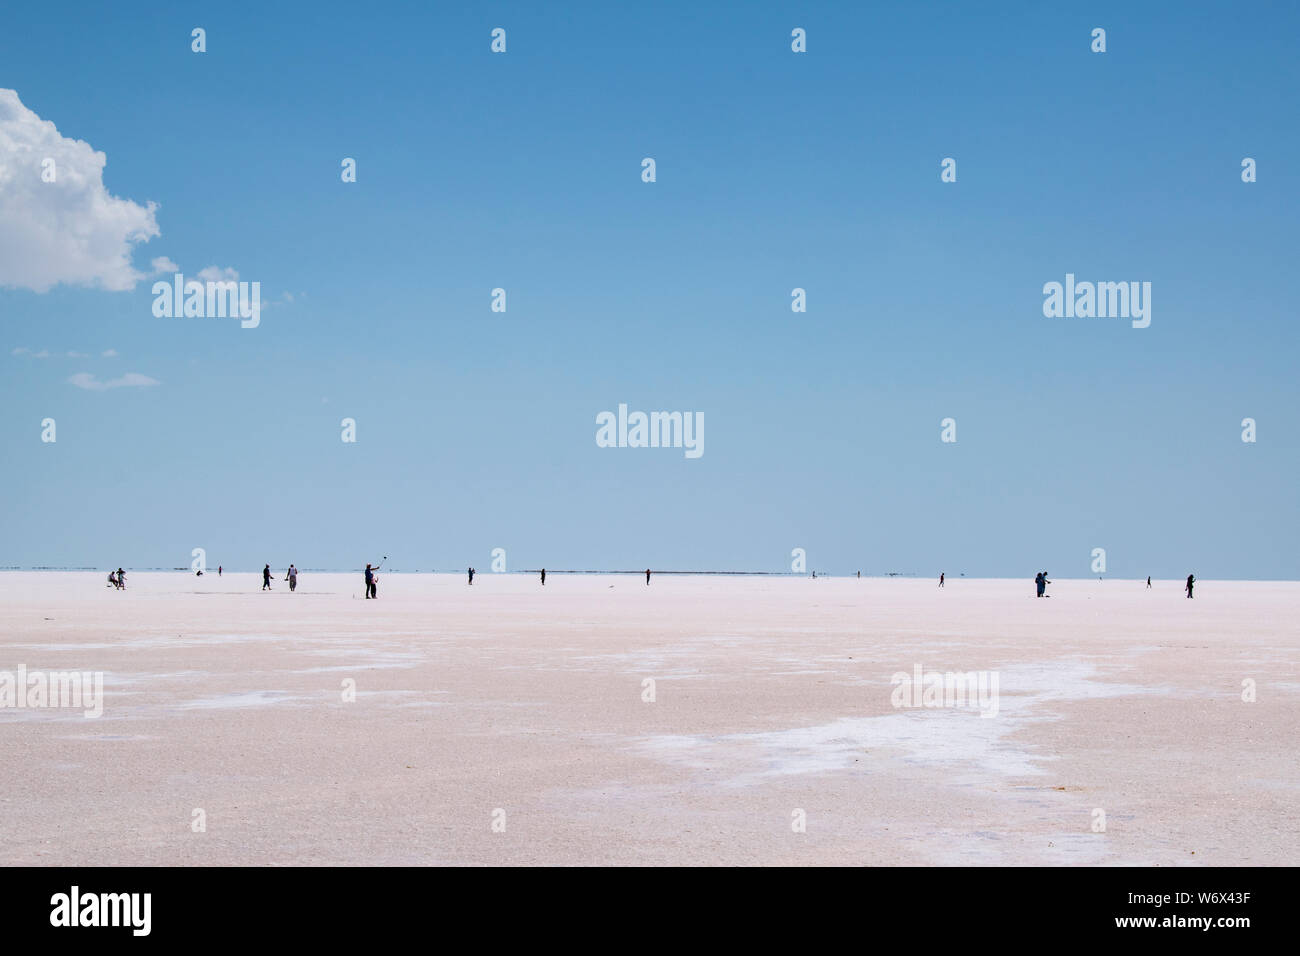 Turkey: people in the distance walking on the salt expanse of Lake Tuz, Tuz Golu, the Salt Lake, one of the largest hypersaline lakes in the world Stock Photo